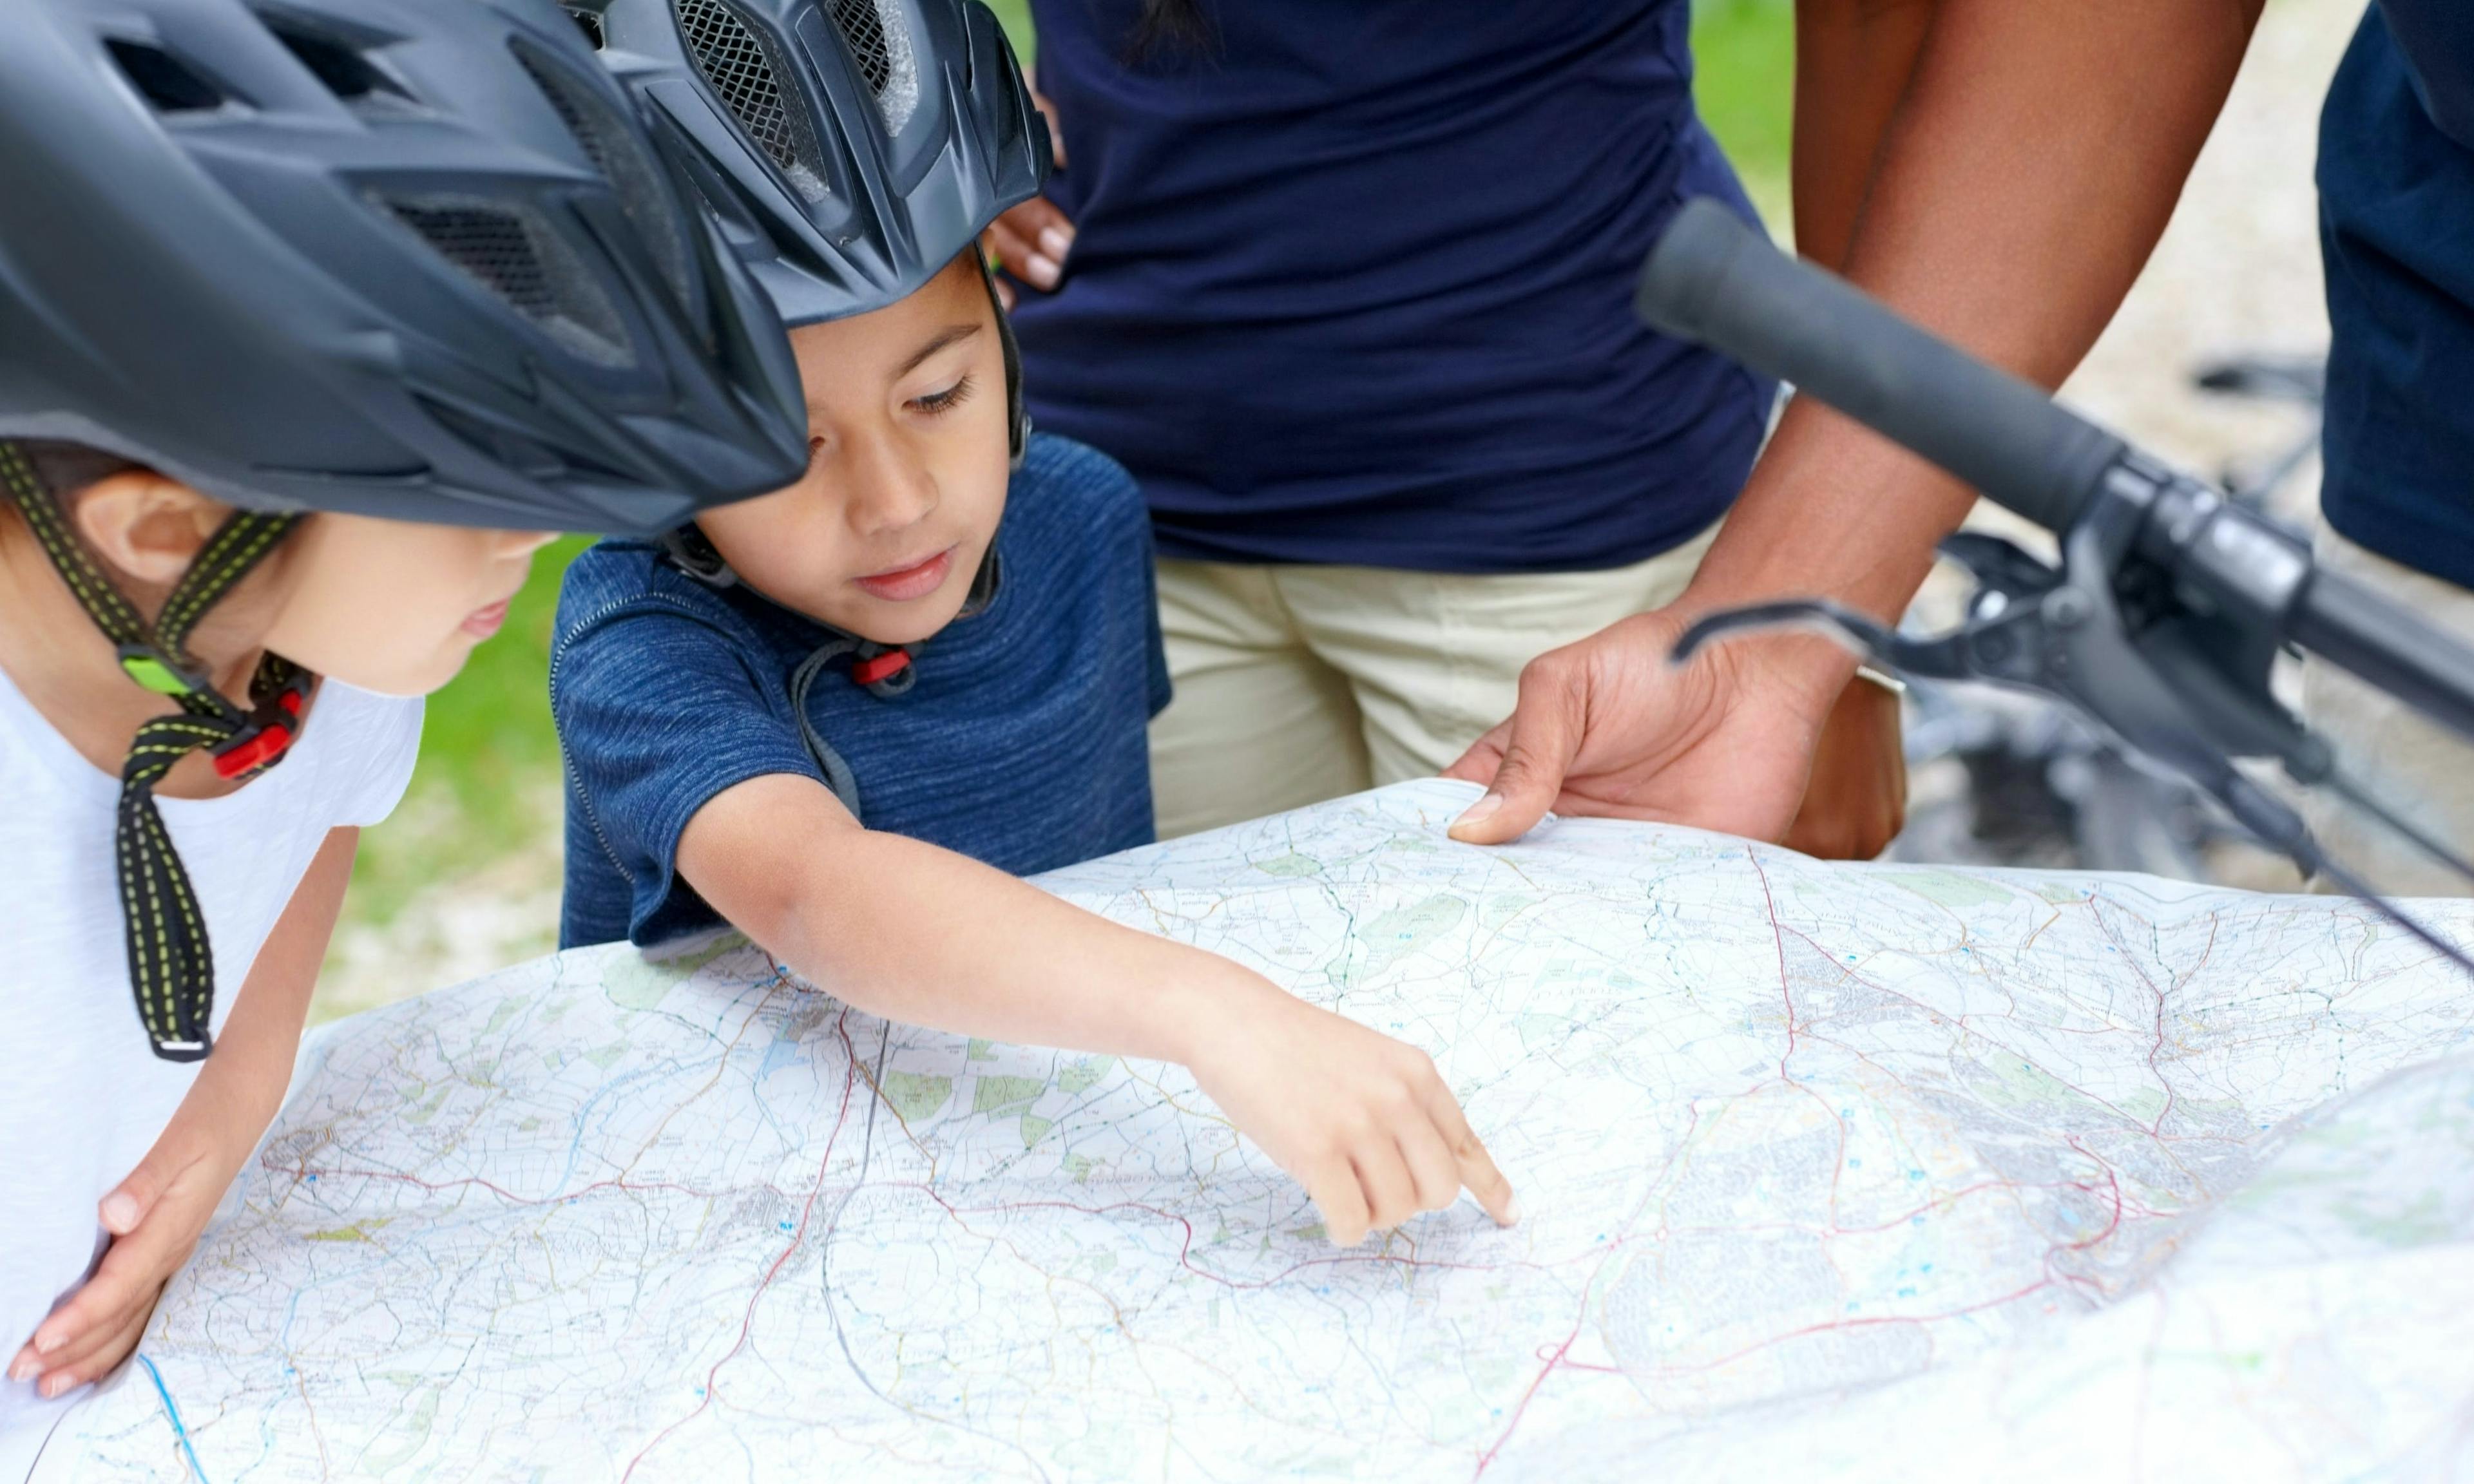 Kid wearing a bike helmet checking out a map